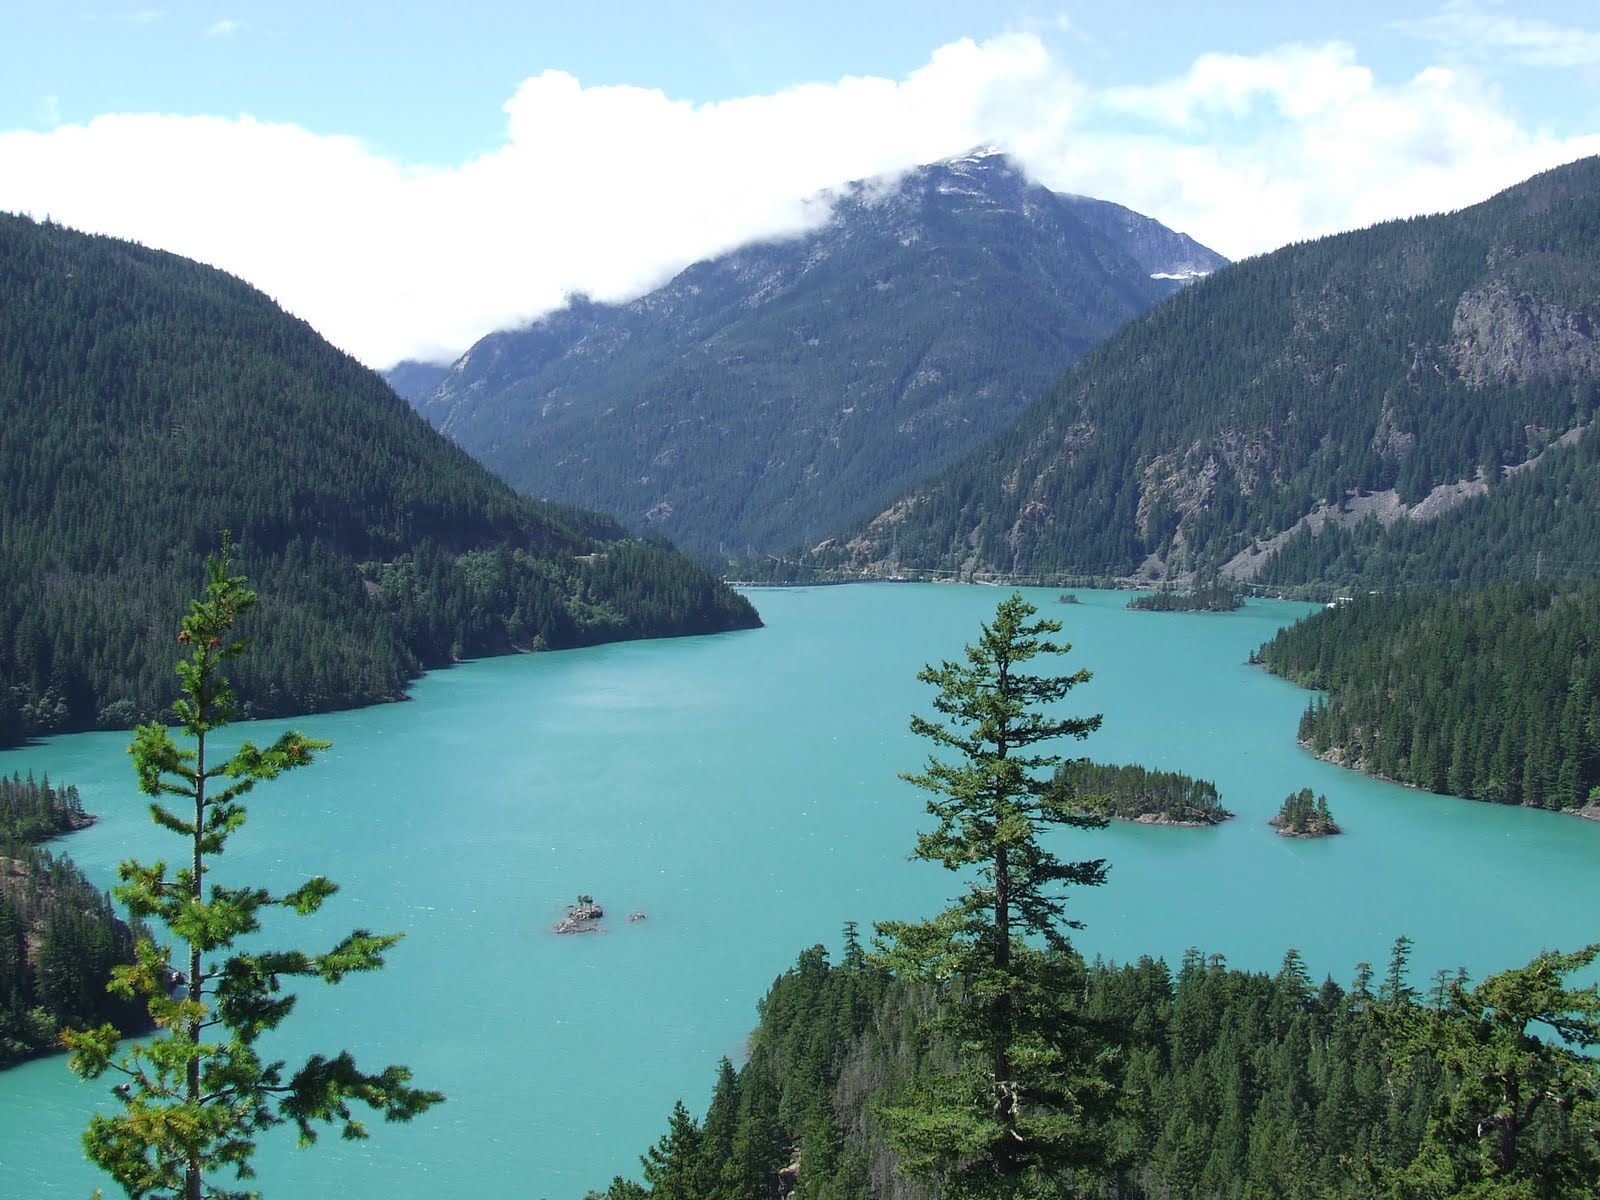 Cliff Mass Weather Blog: Diablo Winds in the North Cascades